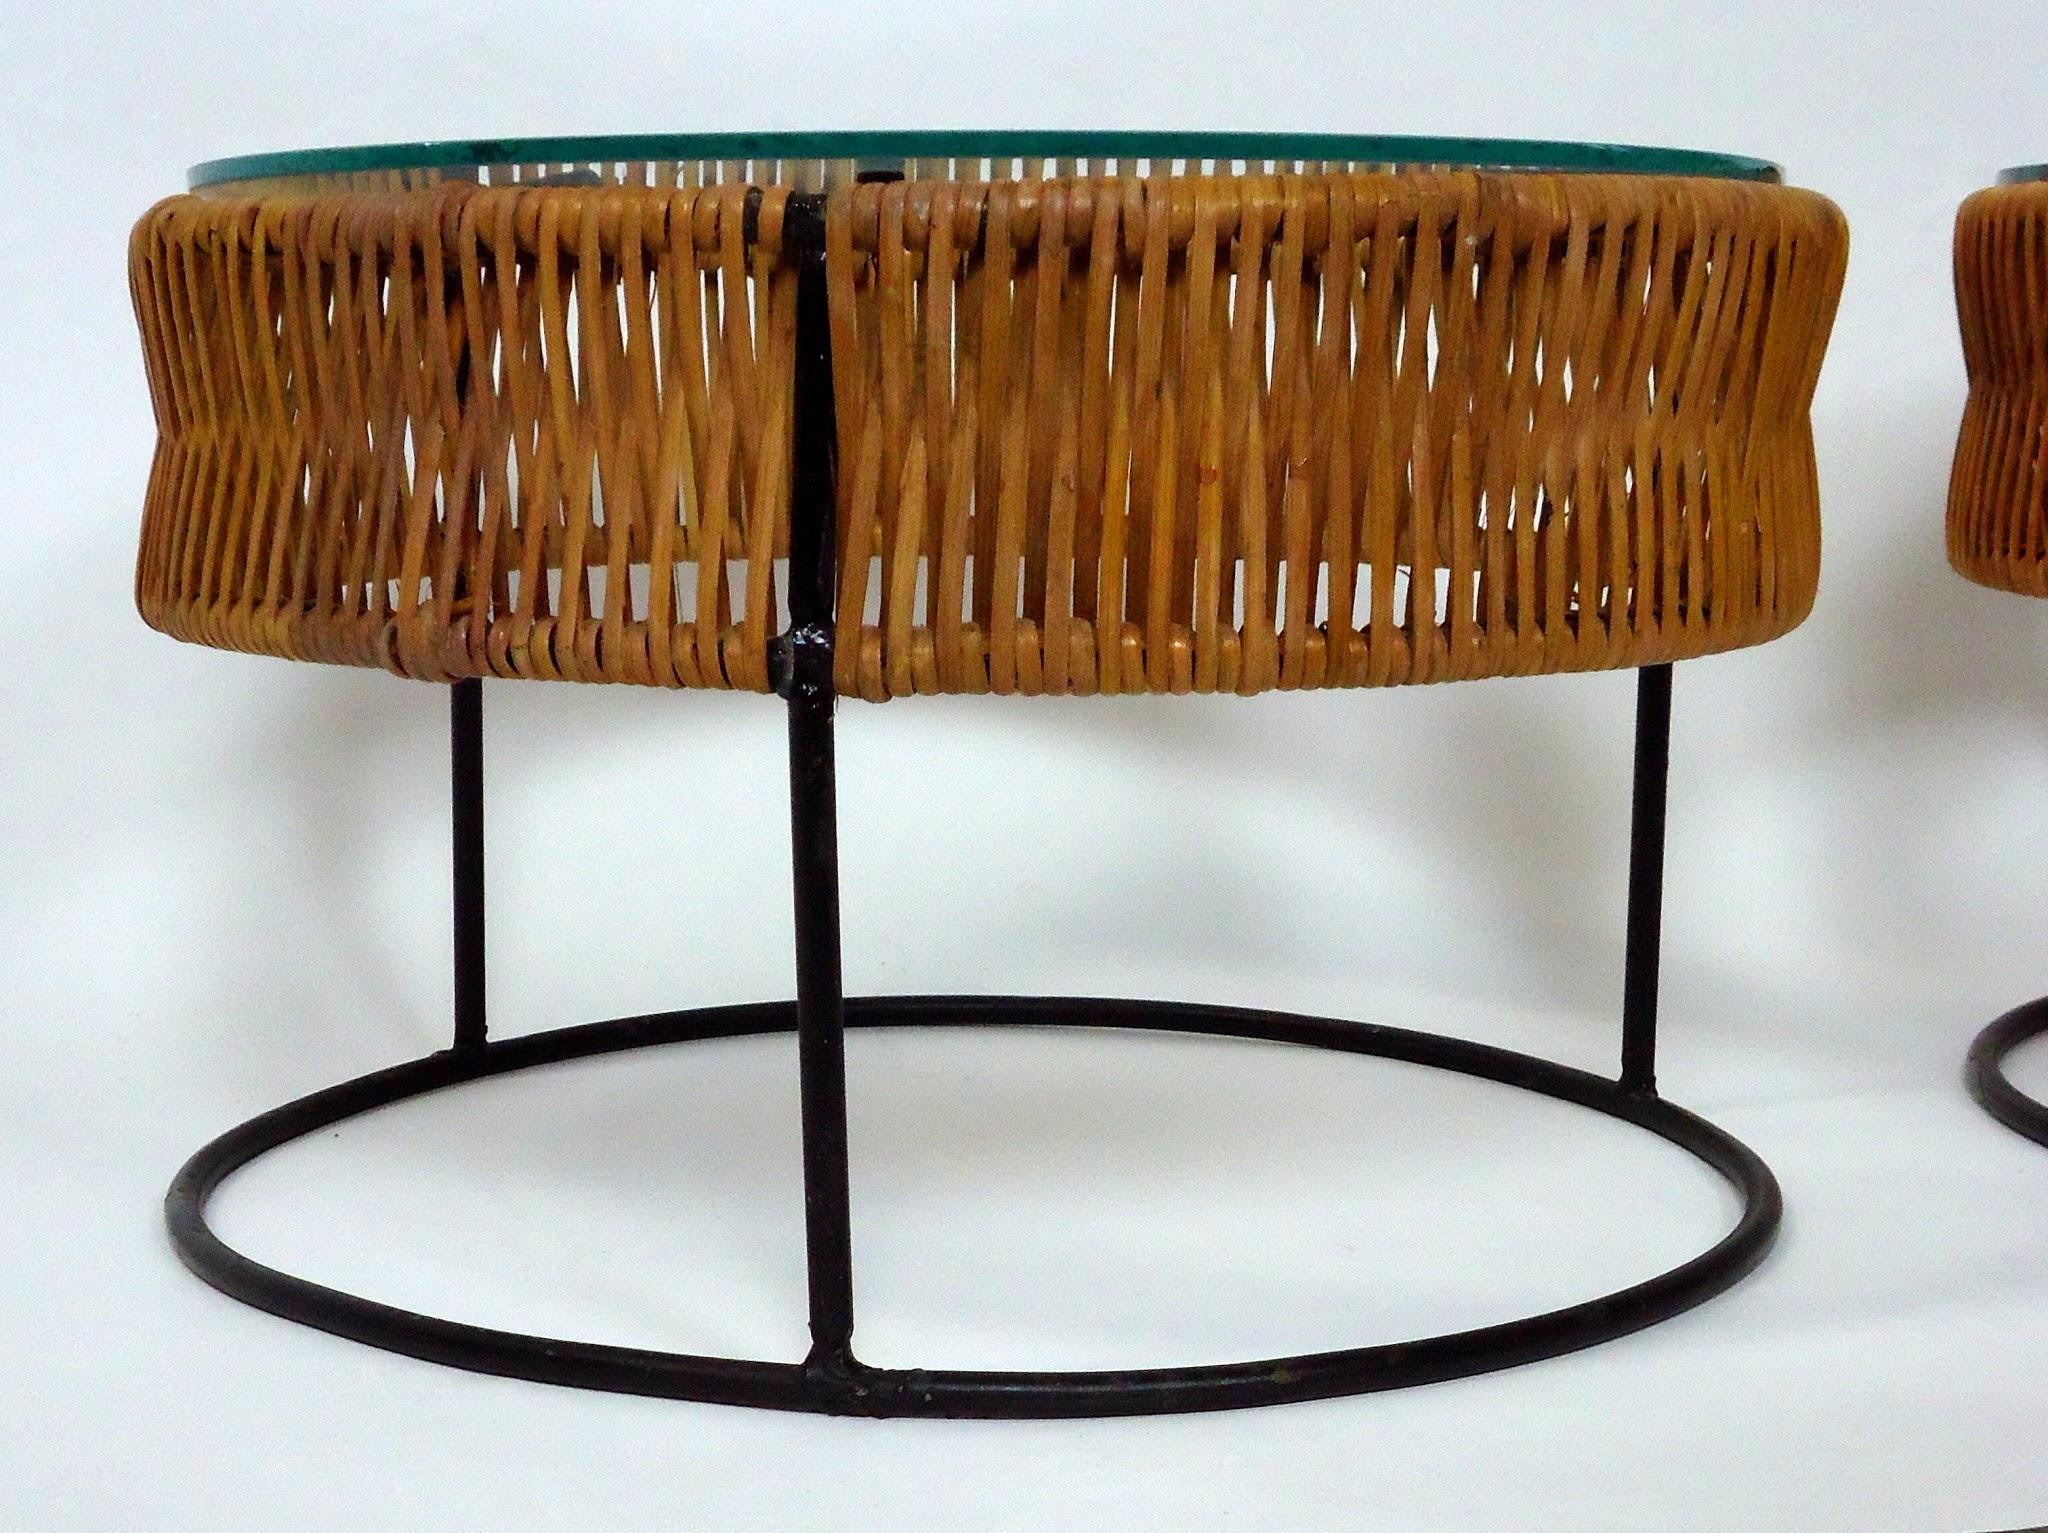 Mid-20th Century Pair of Wrought Iron and Bamboo End Tables / Stools Arthur Umanoff 1960